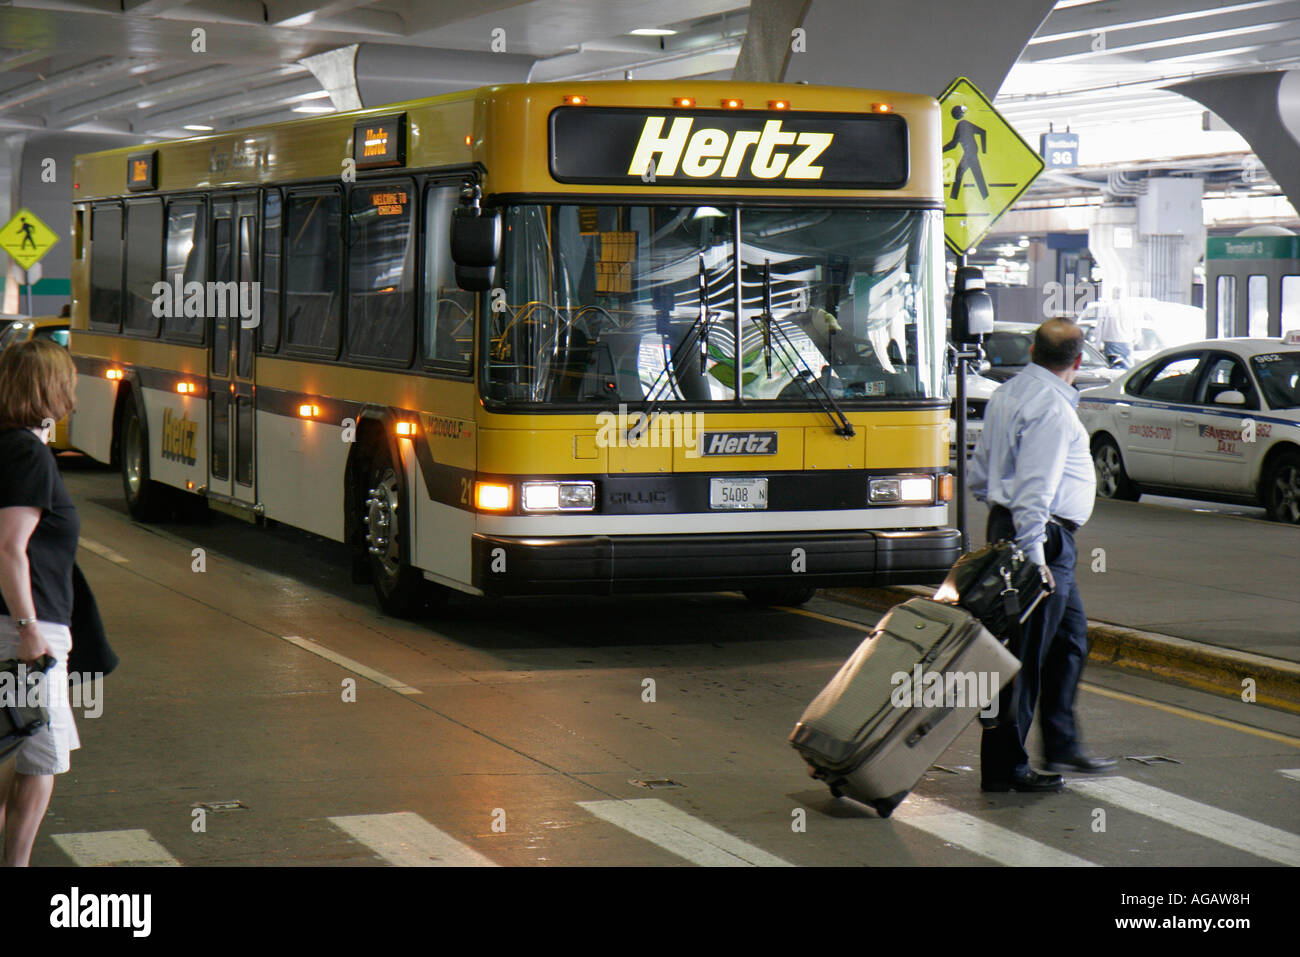 Illinois,IL,Prairie State,Land of Lincoln,Chicago,O'Hare Airport,Hertz car rental shuttle bus,coach,man men male,luggage,suitcase,IL070824011 Stock Photo